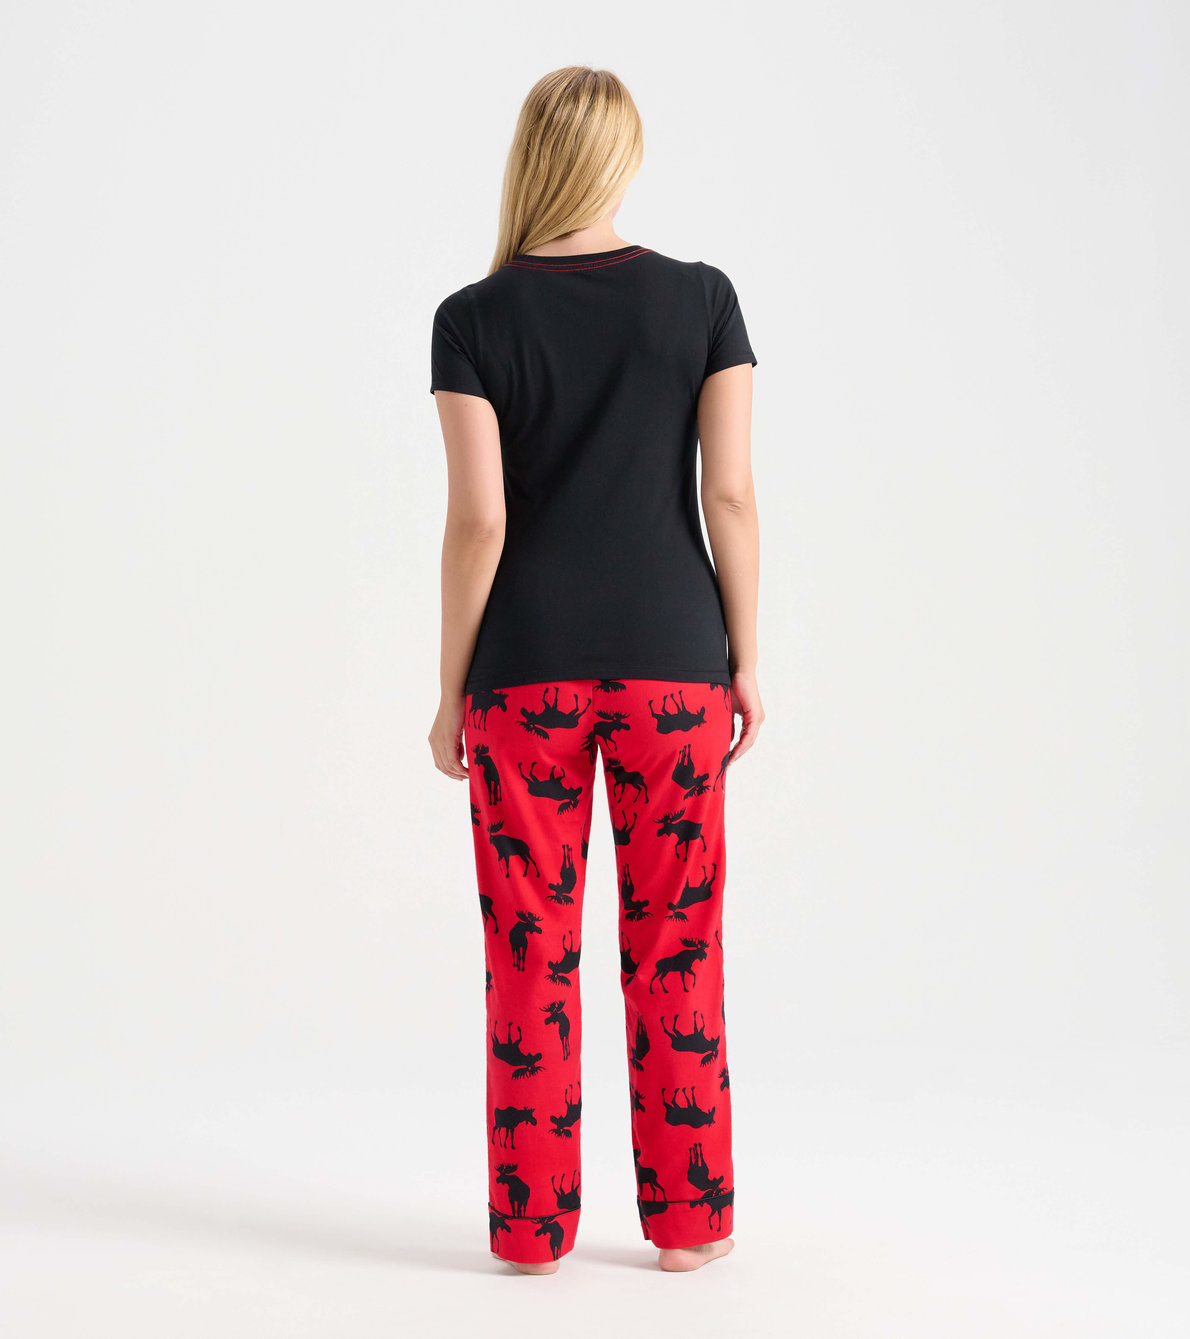 View larger image of Women's Moose On Red T-Shirt and Pants Pajama Separates